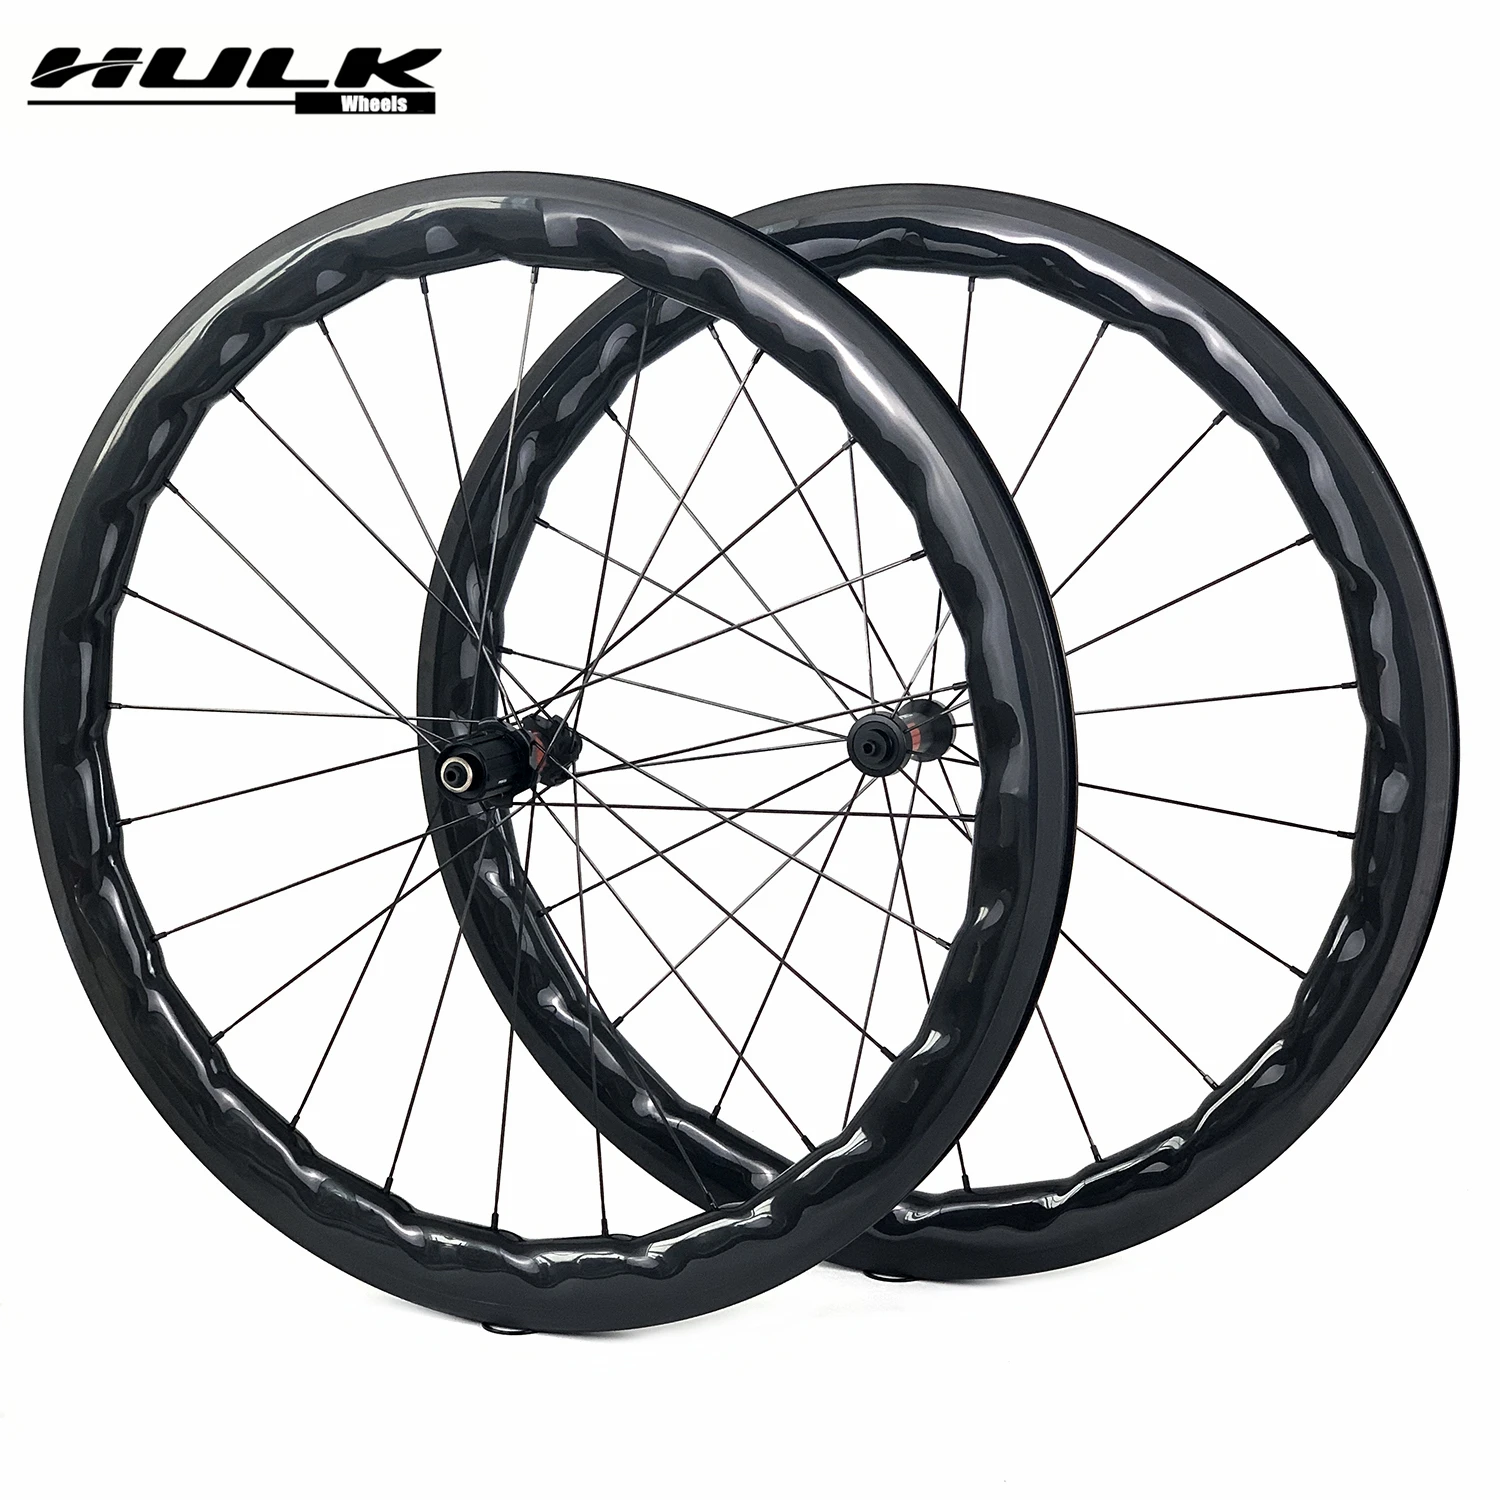 

HULKWHEELS BWS Road Carbon Wheelset 50mm Depth 27mm Width Bicycle Wheels DT SWISS 240s Ratchet EXP System 20-24H Bike Cycling